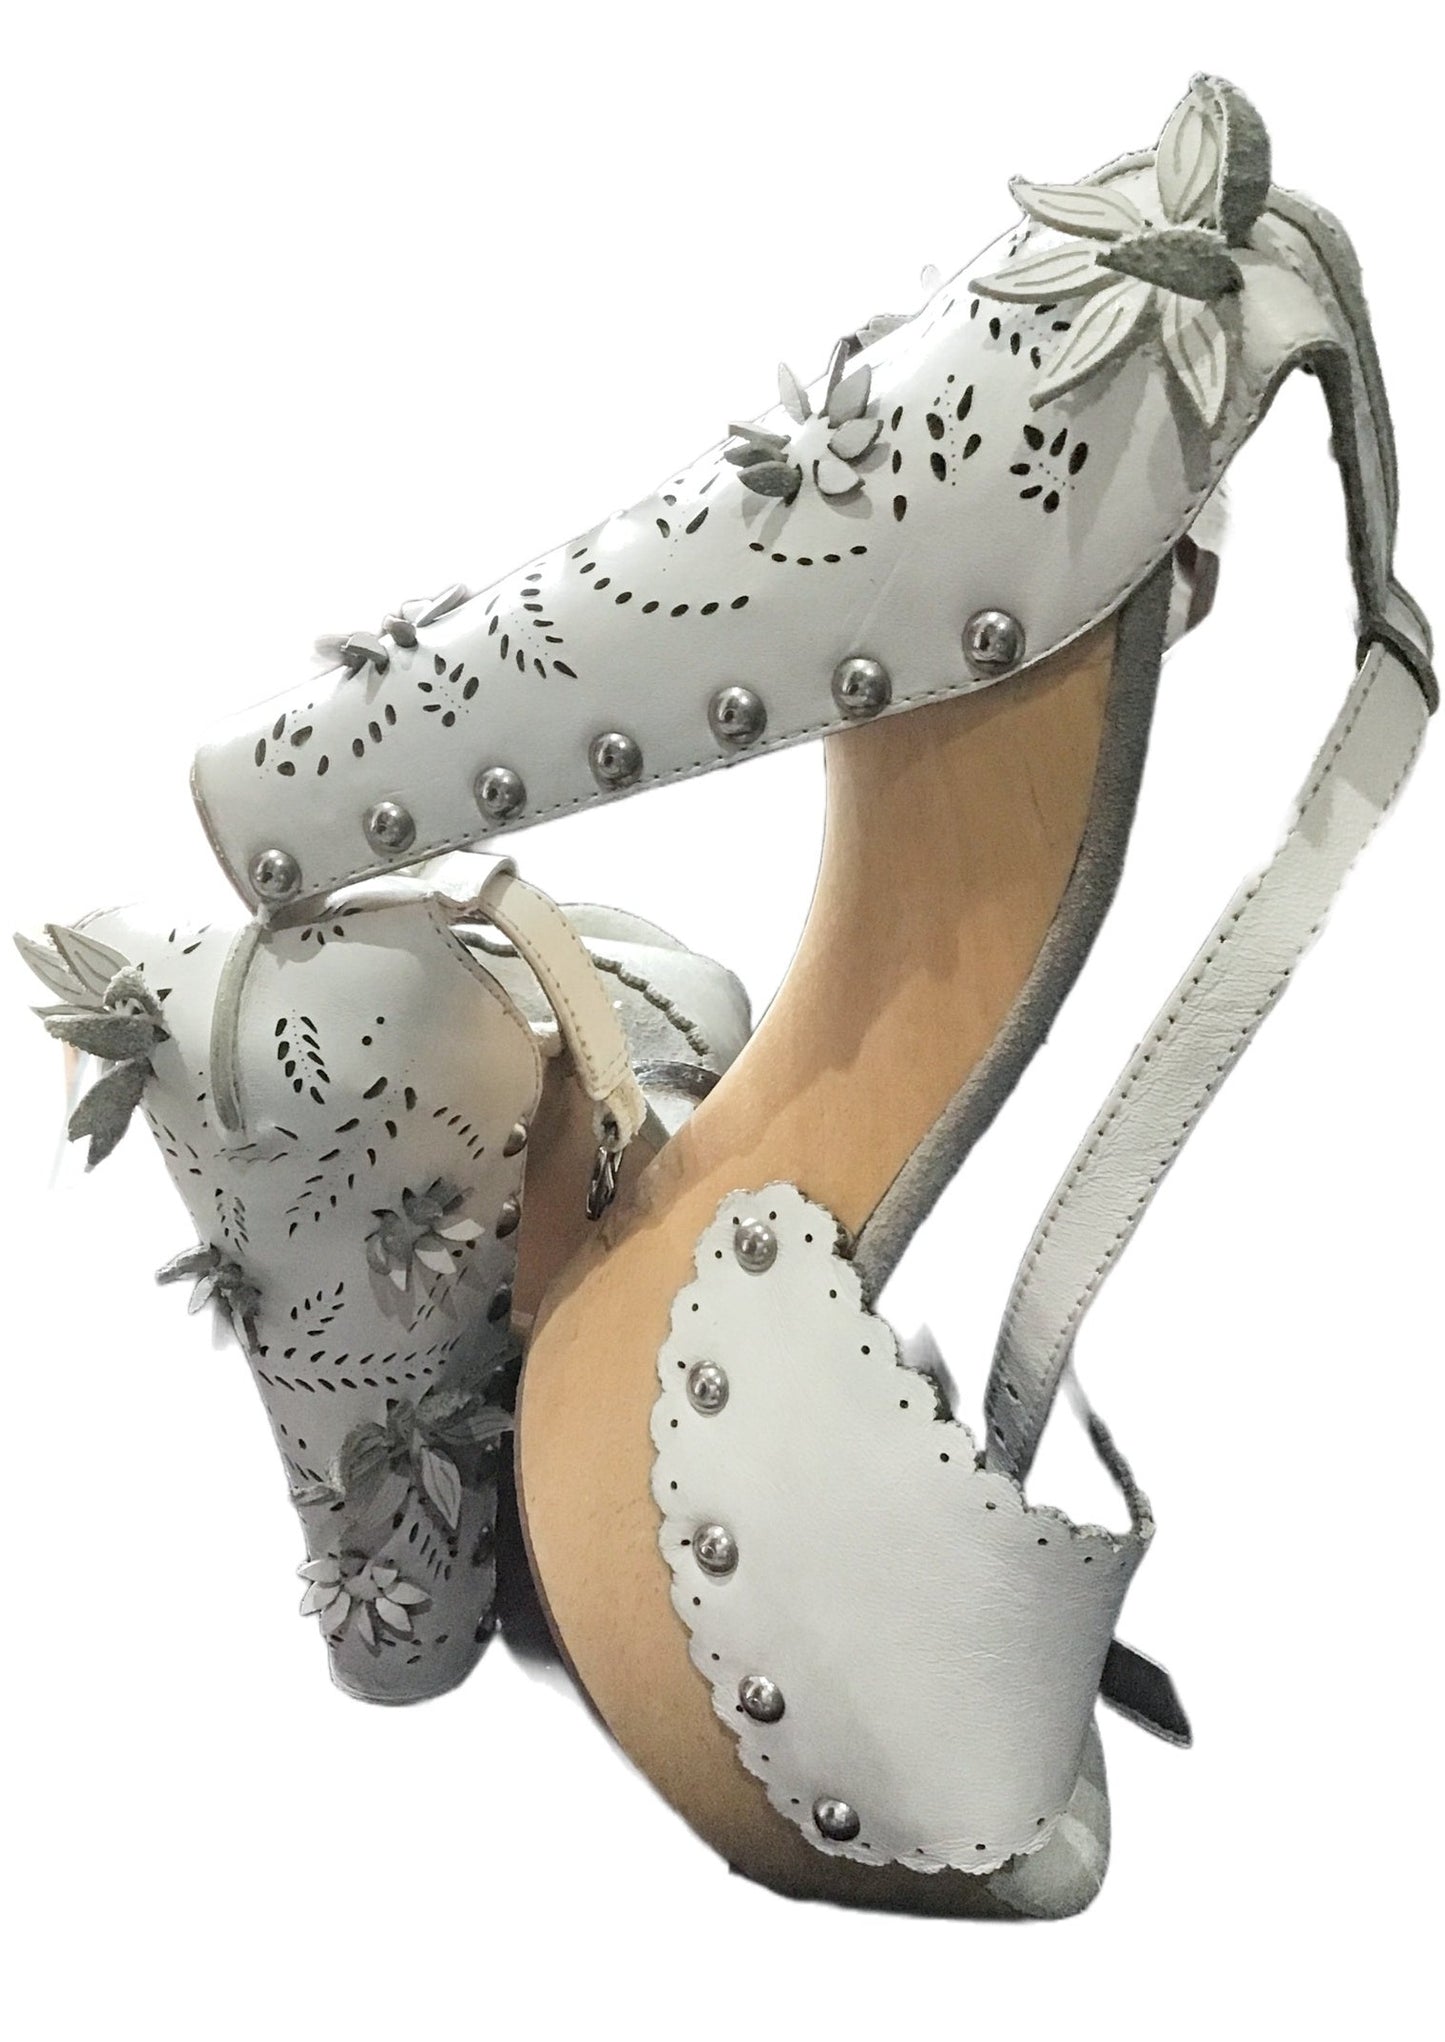 Retro 40s style High Heel Clog White Cutwork Leather Sandals Shoes • size UK5 by Schuh